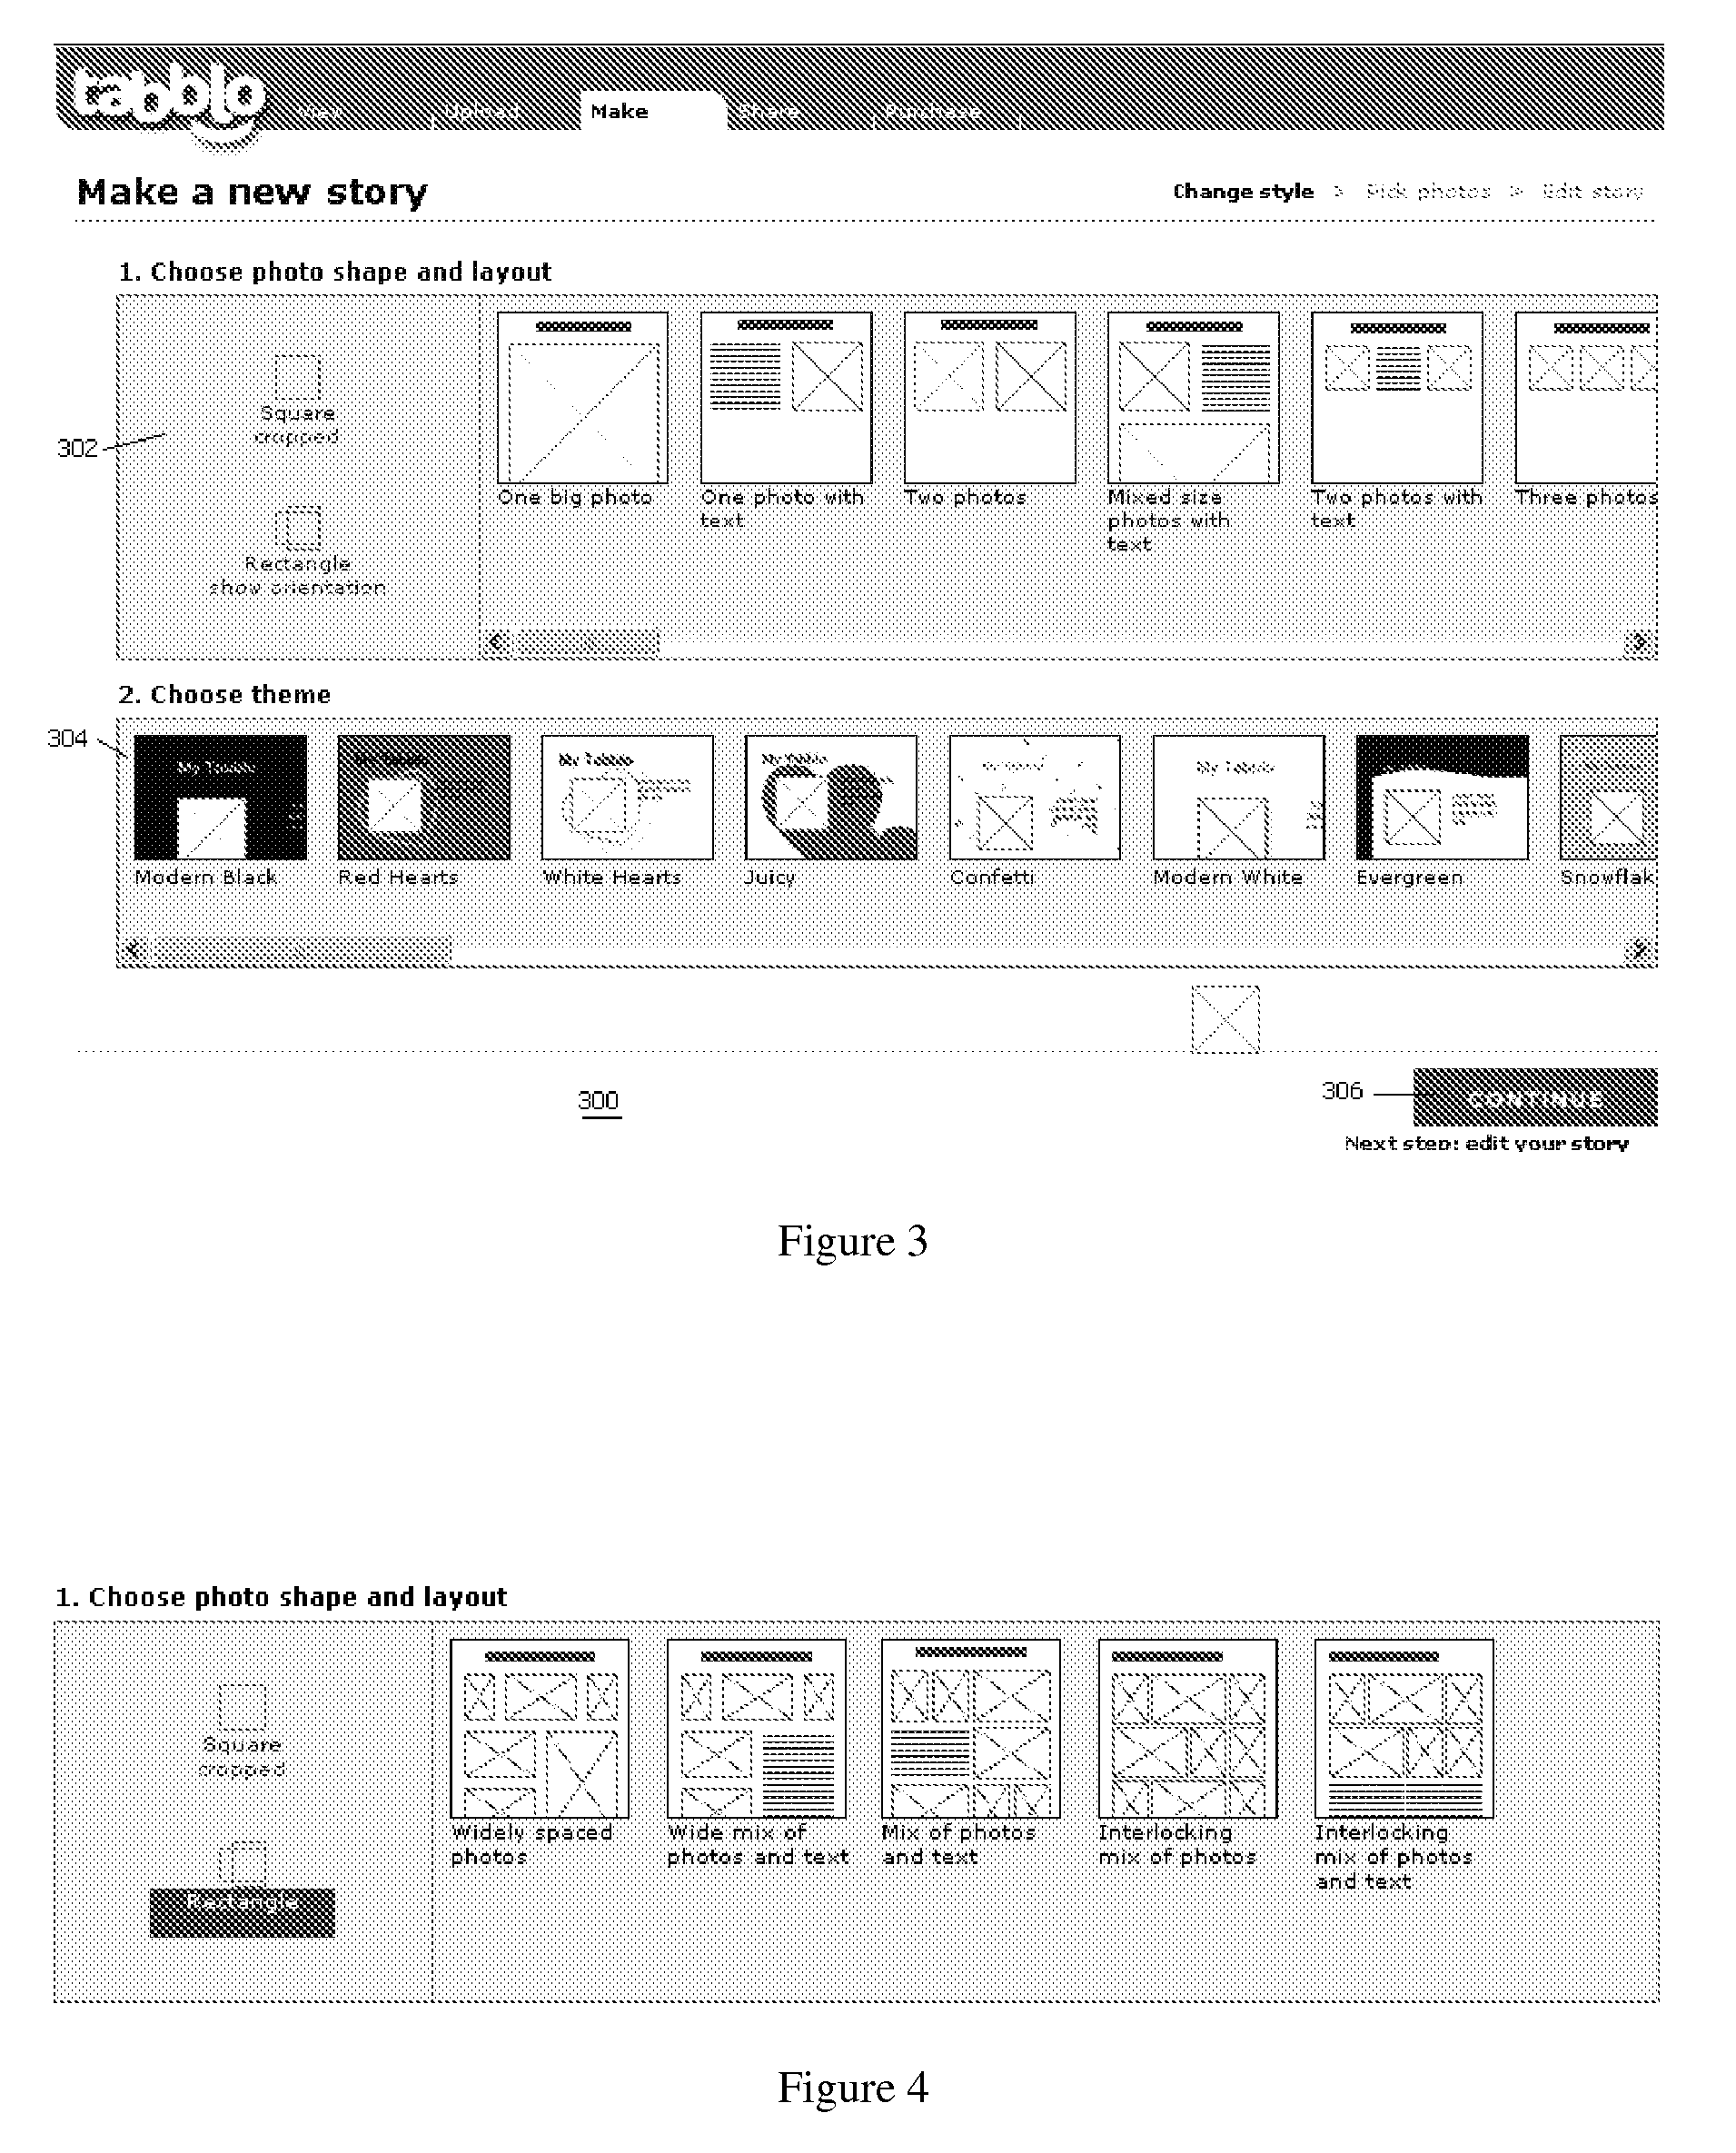 Method for initial layout of story elements in a user-generated online story